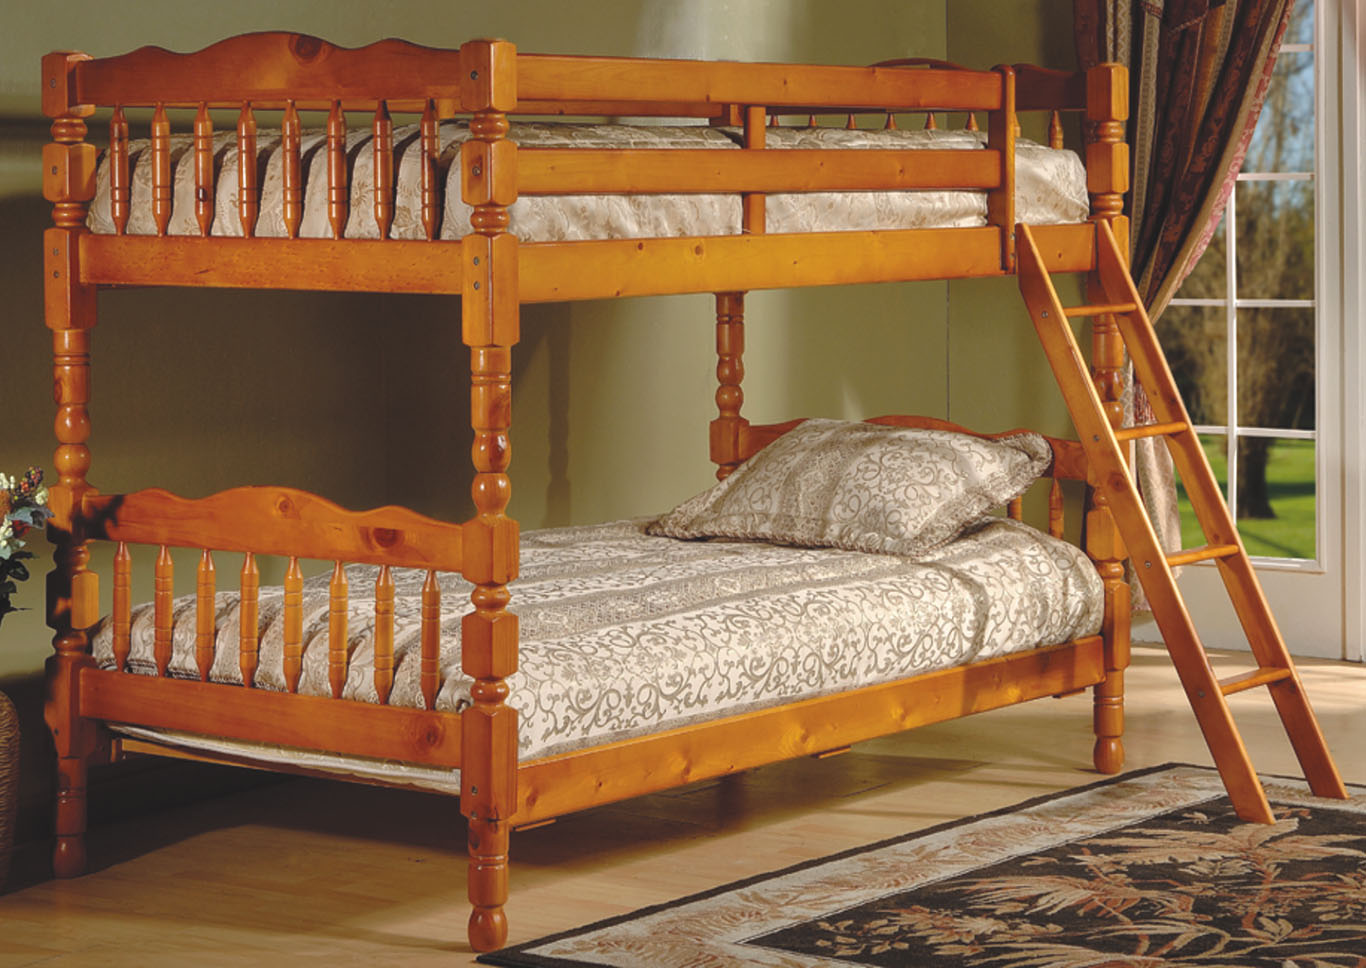 cheap bunk beds mattresses included